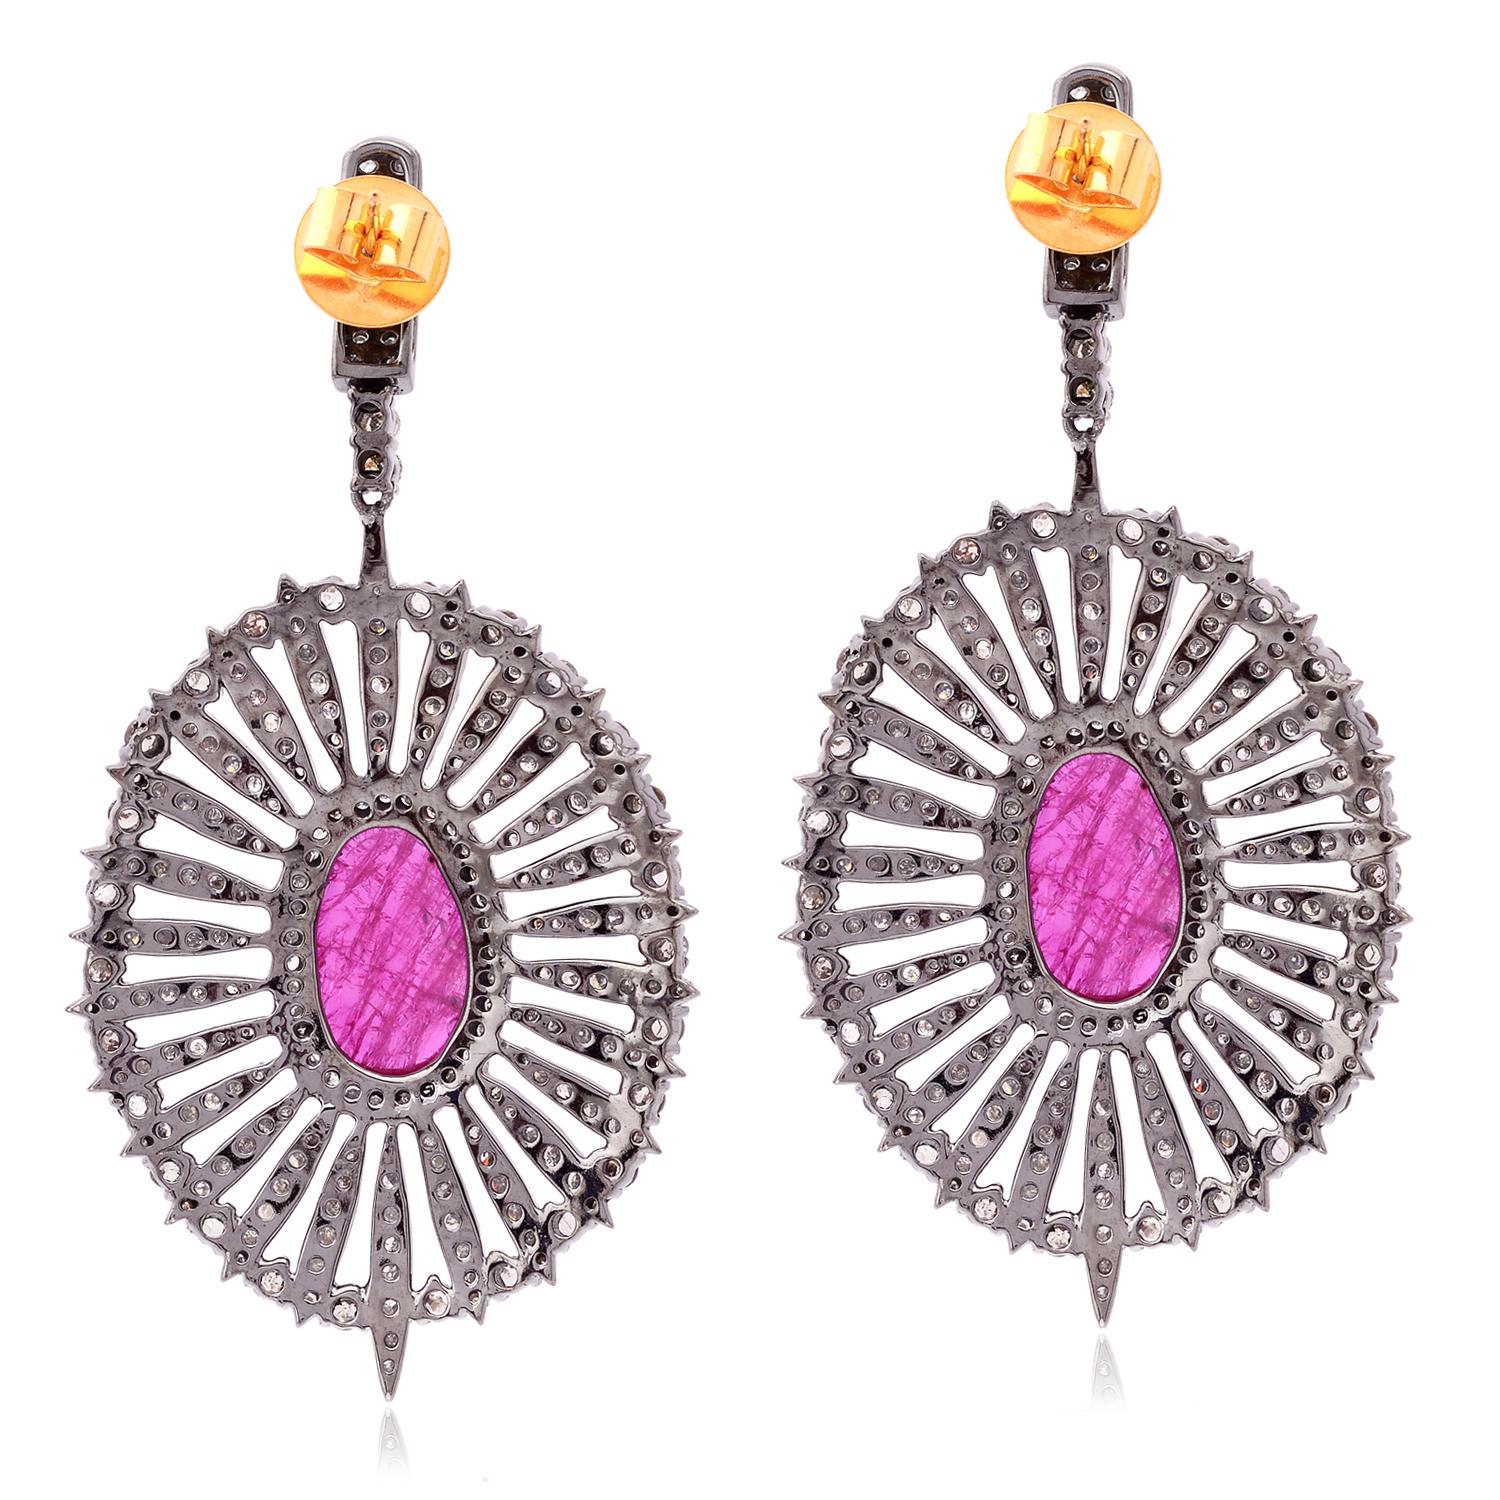 Art Nouveau Oval Shaped Ruby Sunburst Earrings with Pave Diamonds In 18k Gold & Silver For Sale